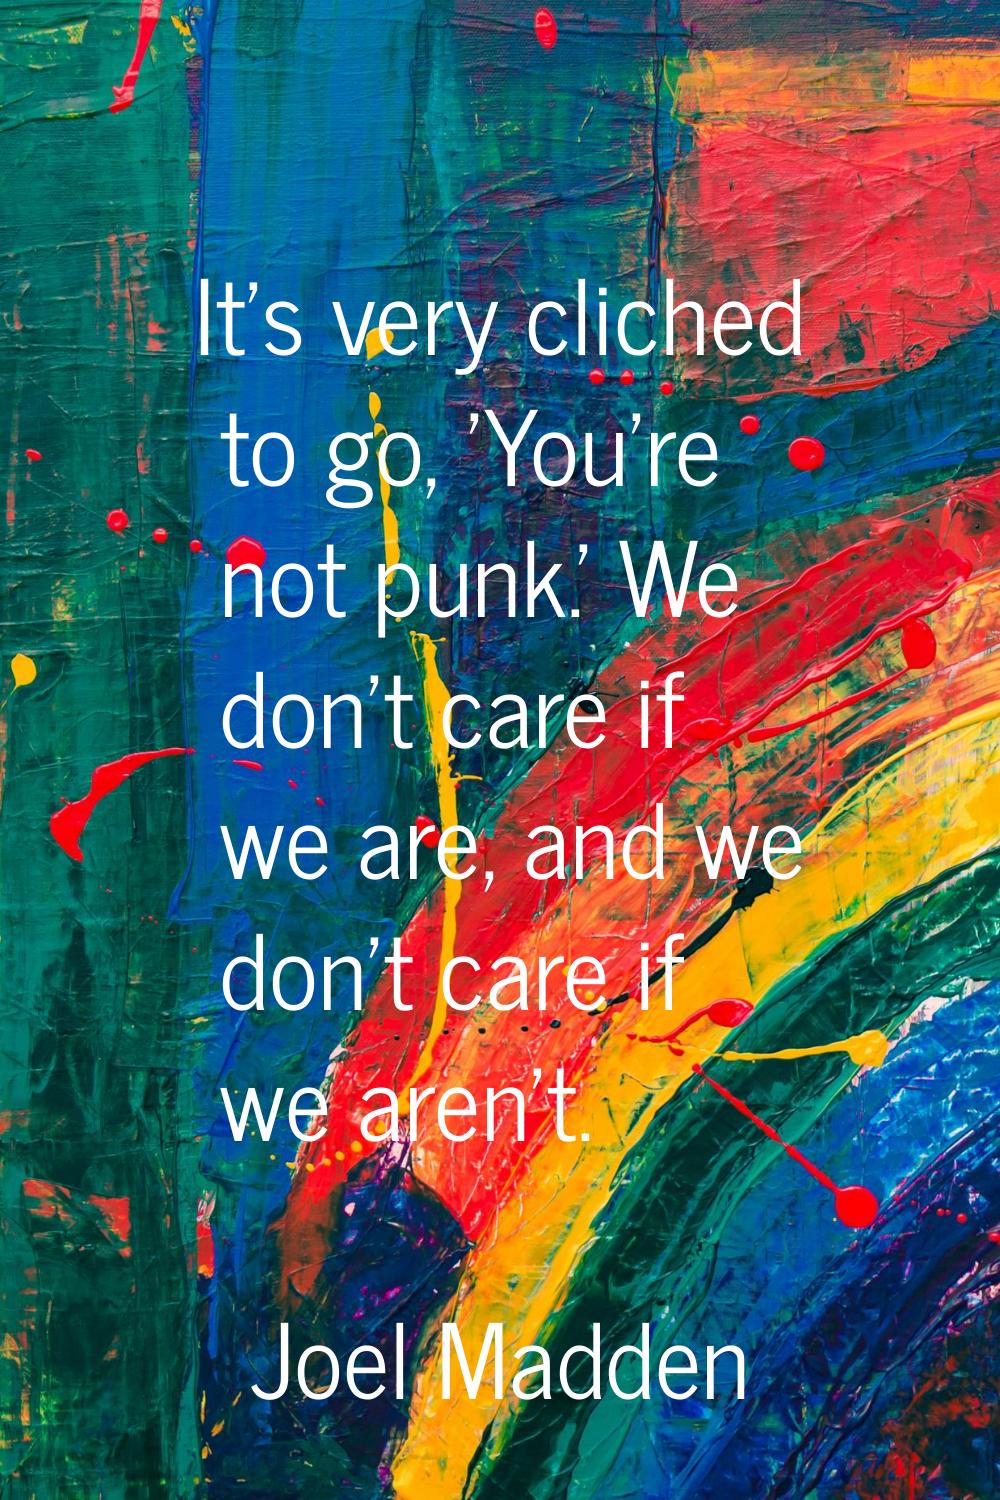 It's very cliched to go, 'You're not punk.' We don't care if we are, and we don't care if we aren't